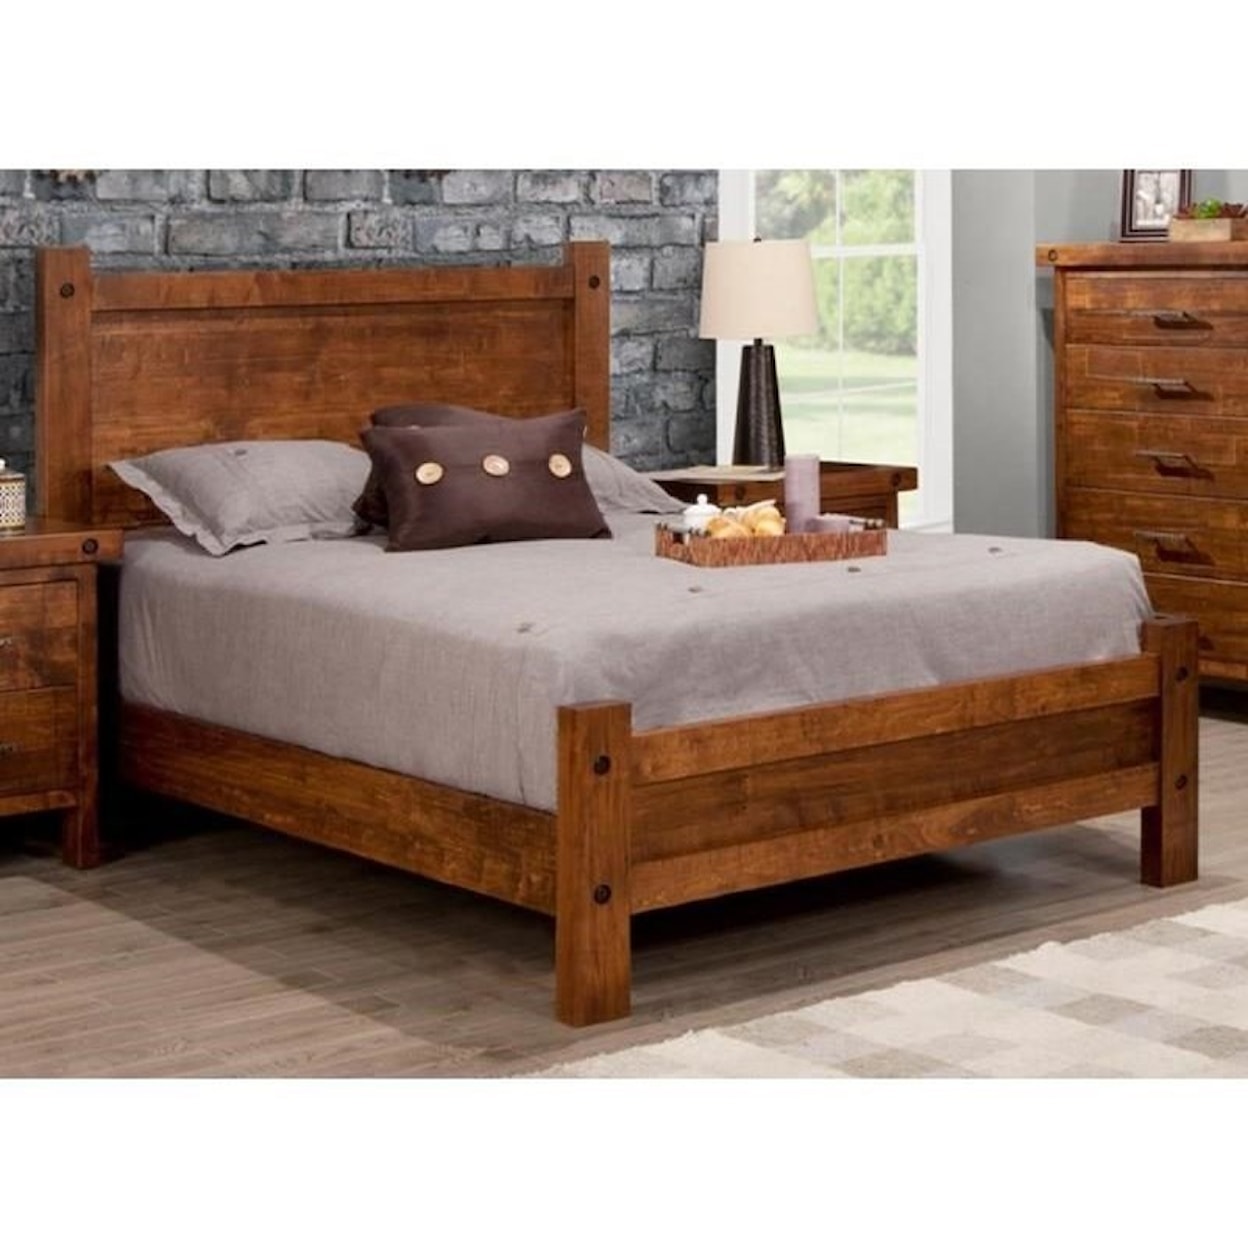 Handstone Rafters Single Bed with Low Footboard